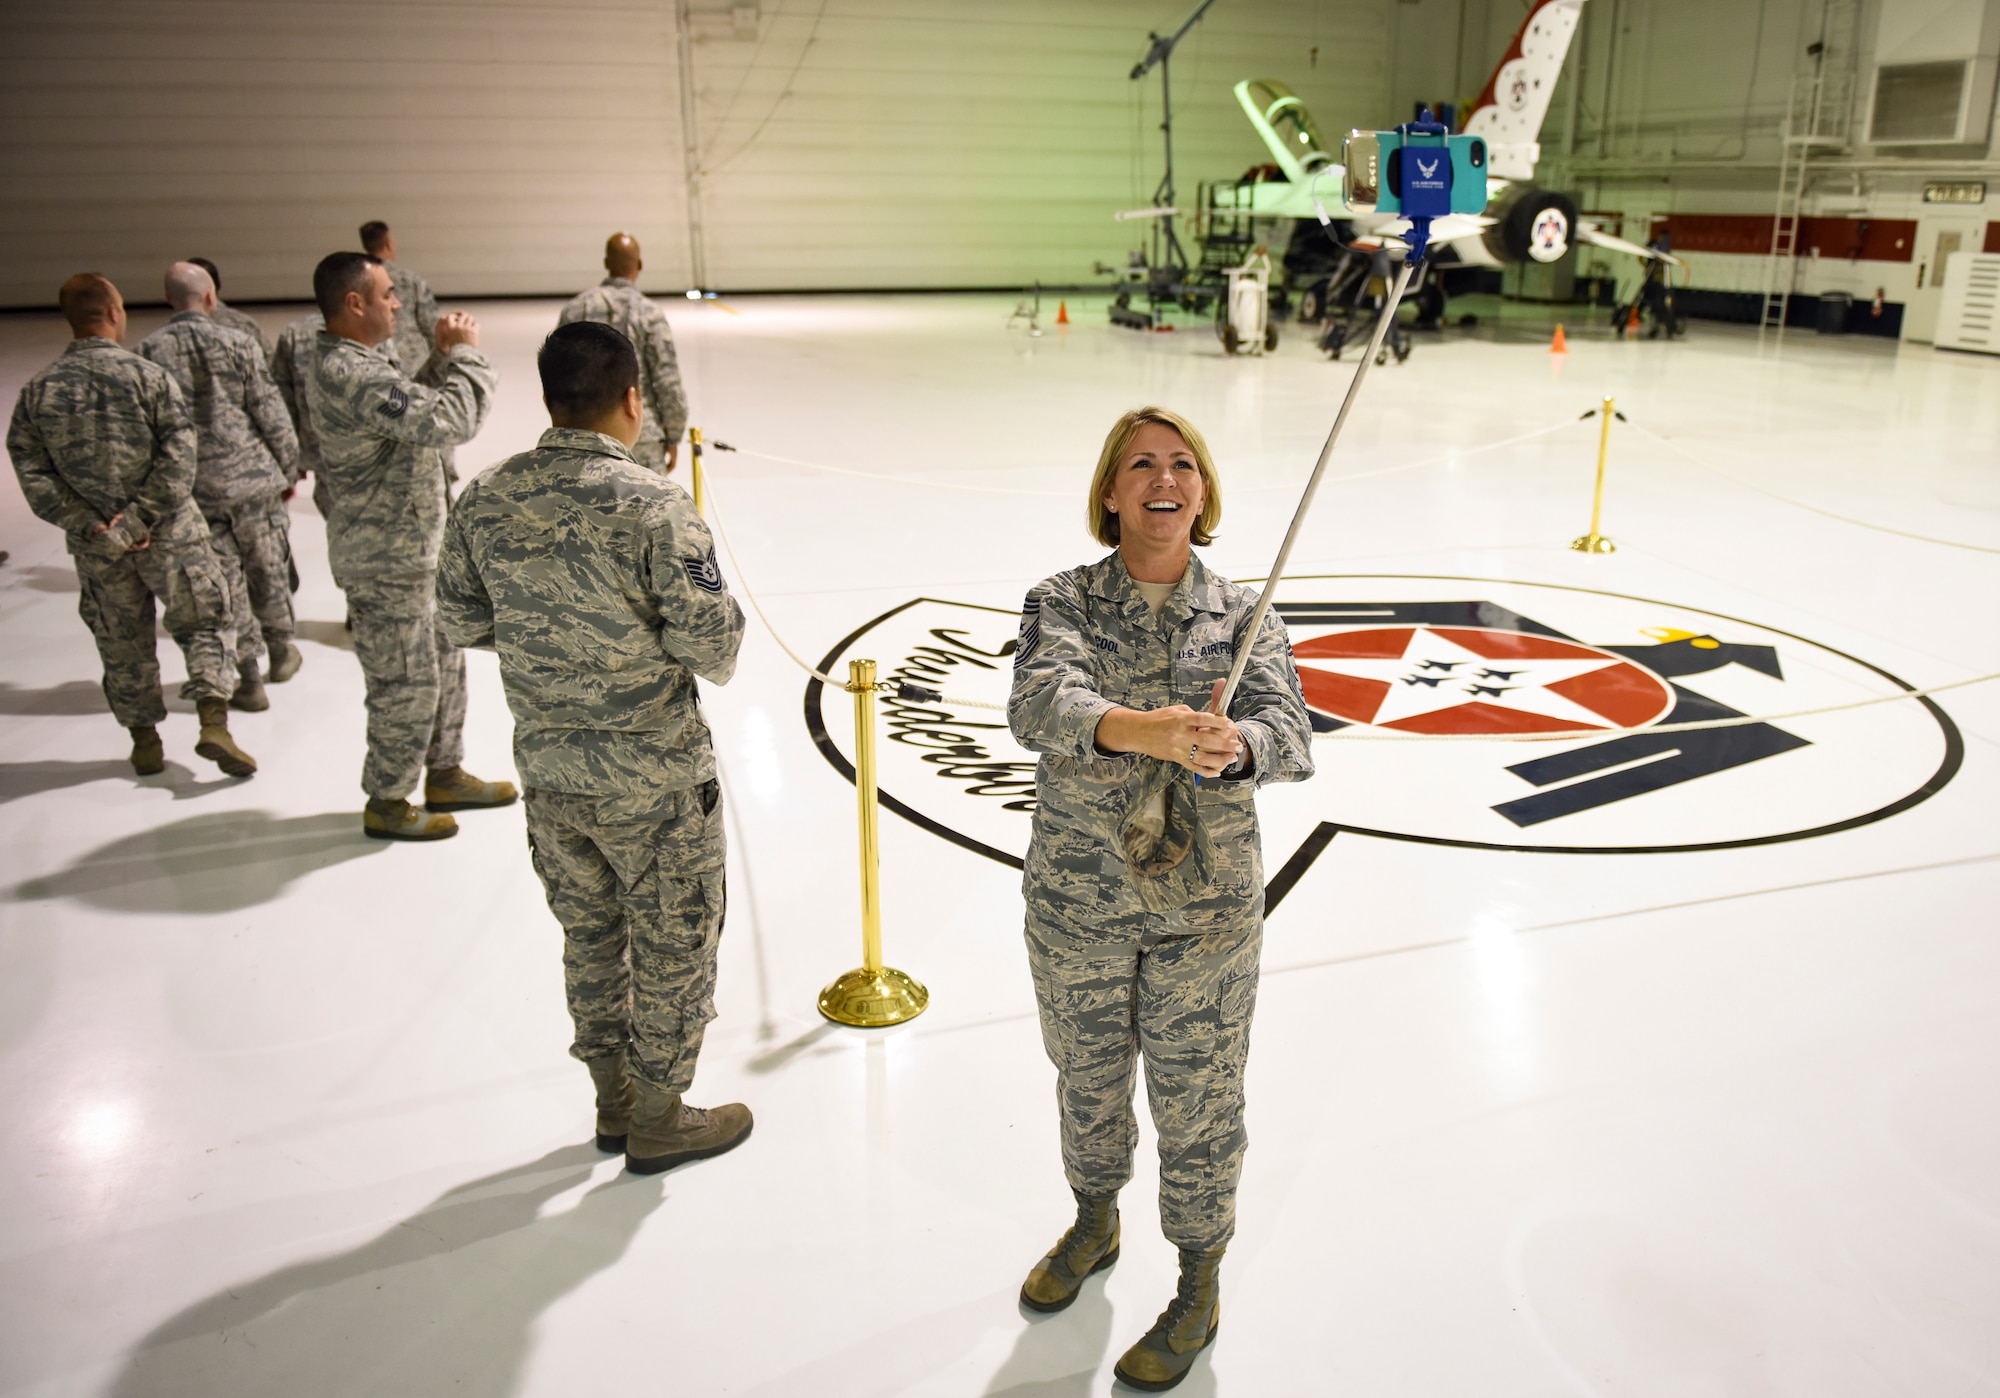 Chief Master Sgt. Kathleen McCool, 53rd Wing command chief at Eglin Air Force Base, Florida, takes a picture in the Thunderbirds hangar during a tour with the Warrior Stripe program at Nellis Air Force Base, Nevada, Aug. 18, 2018. The two-week course brought together 40 U.S. Air Force Warfare Center NCOs to provide an avenue for them to develop as military and professional leaders. (U.S. Air Force photo by Airman 1st Class Andrew D. Sarver)